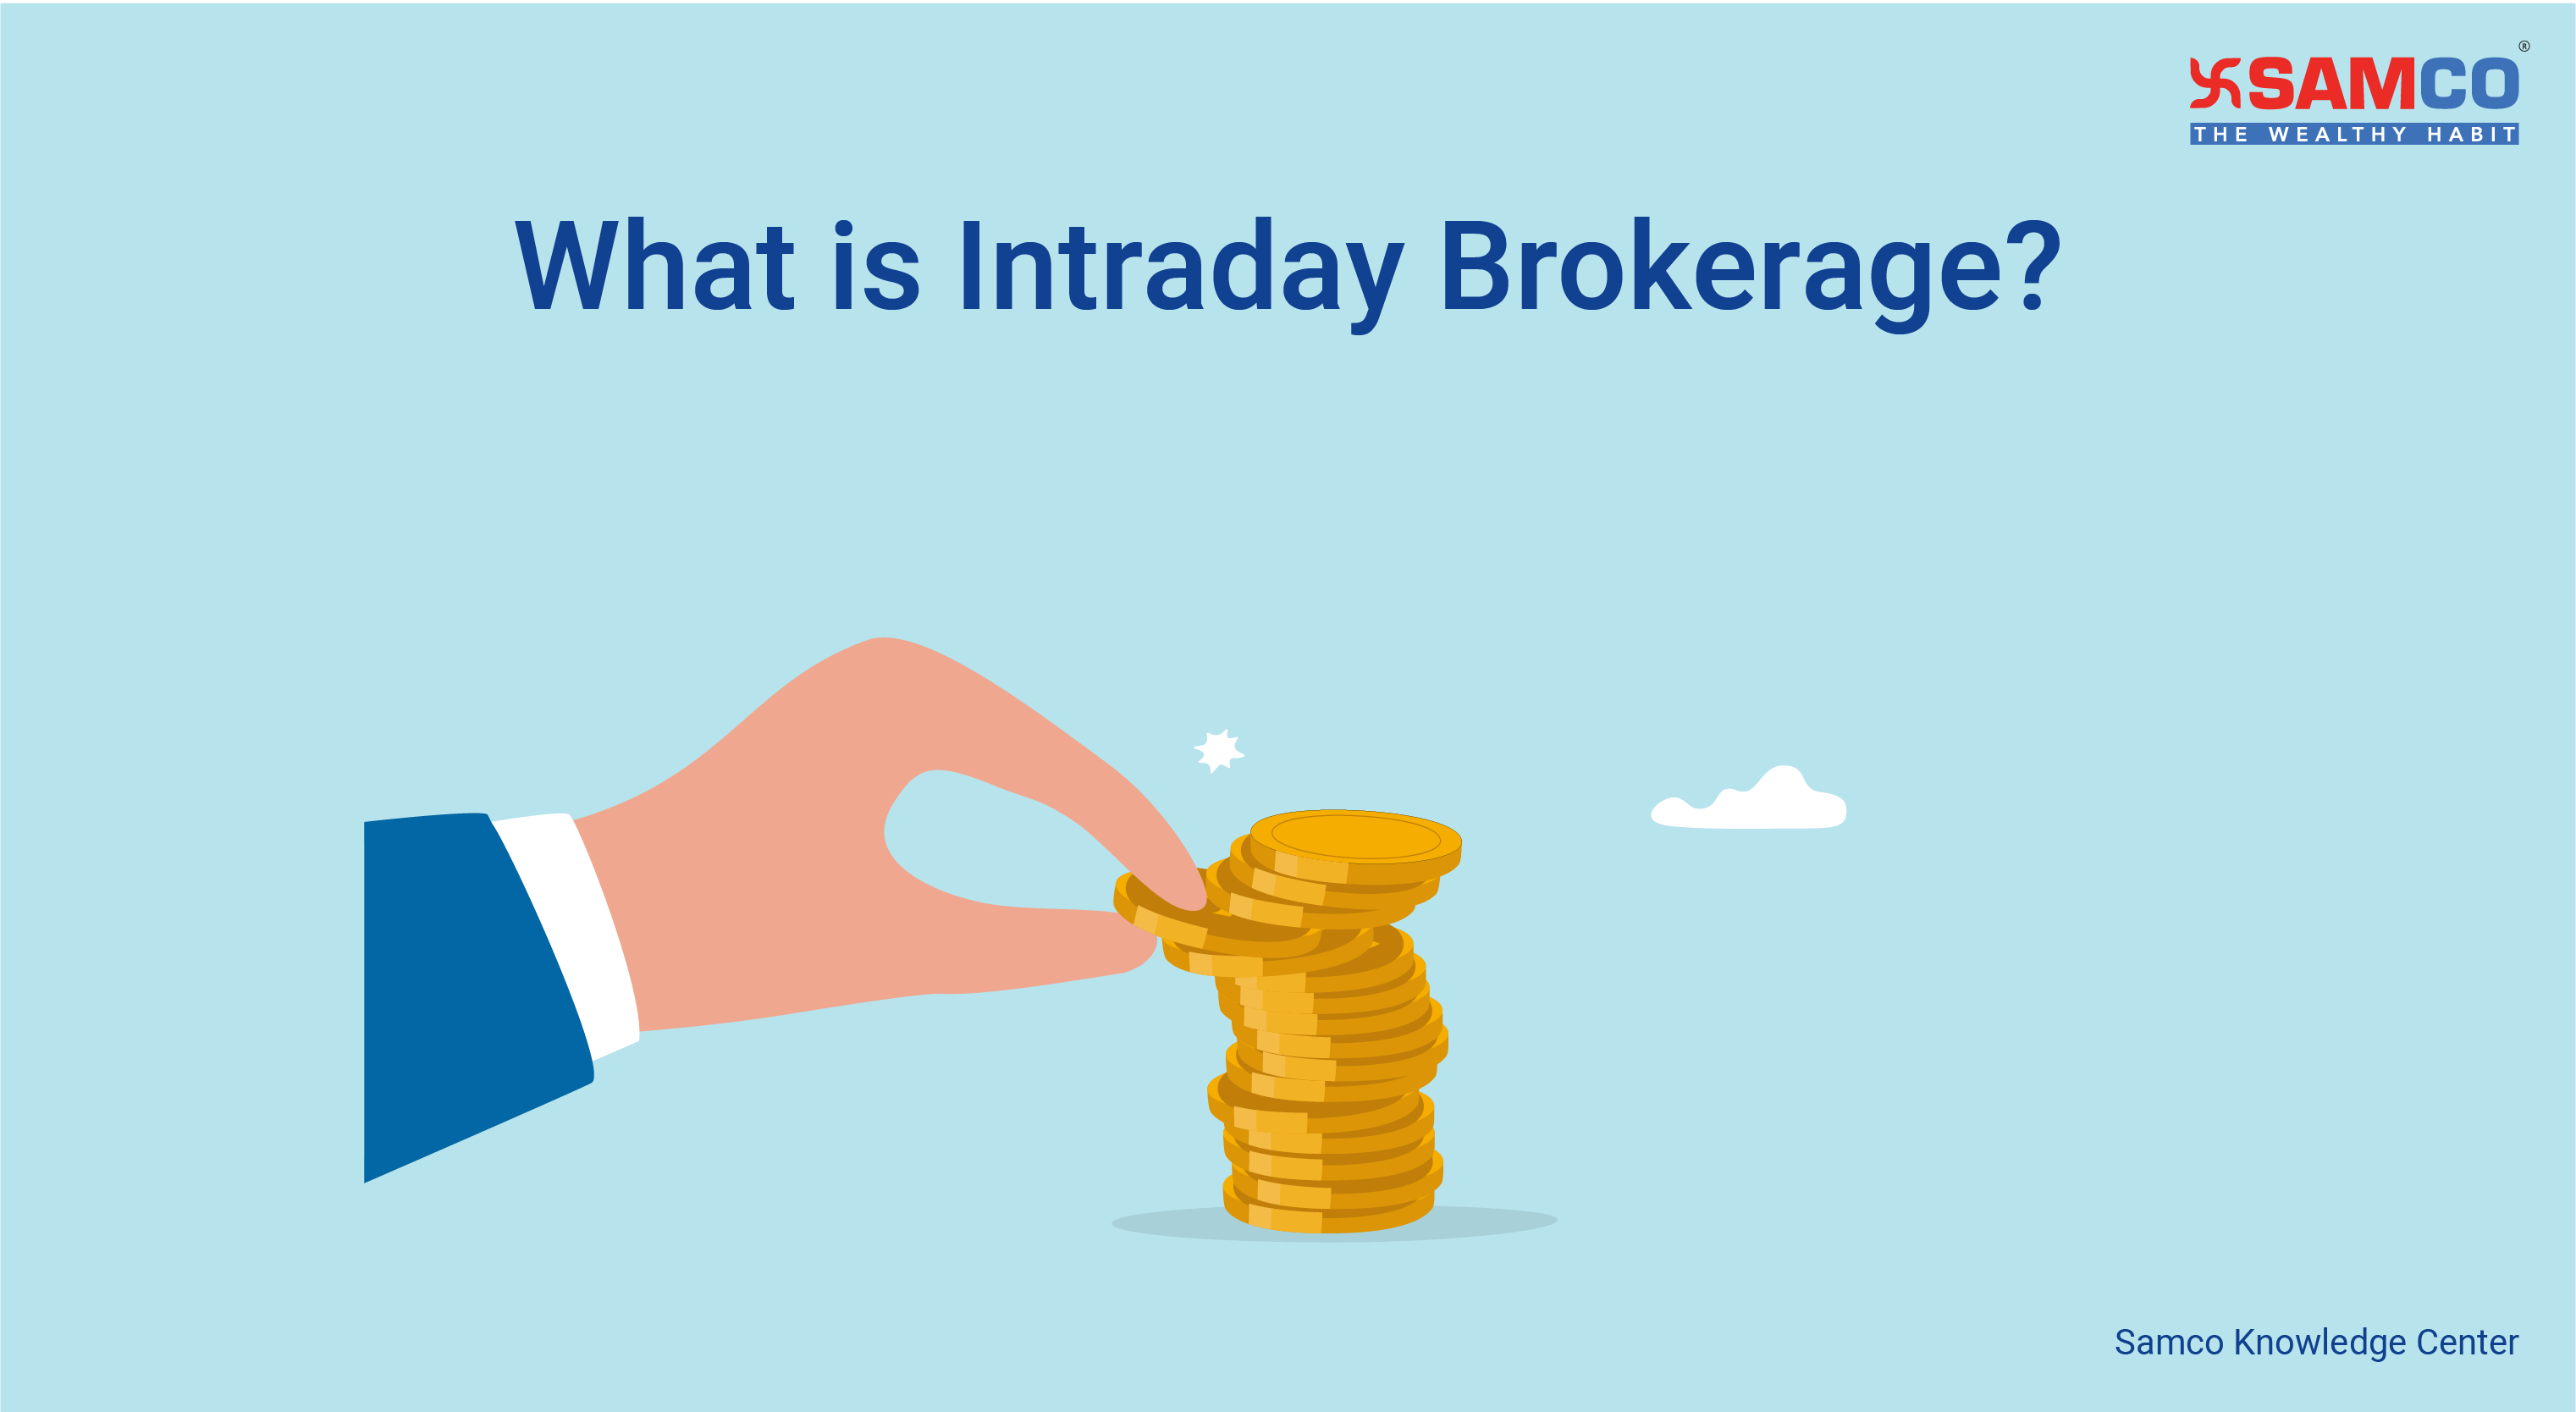 What is Intraday Brokerage?